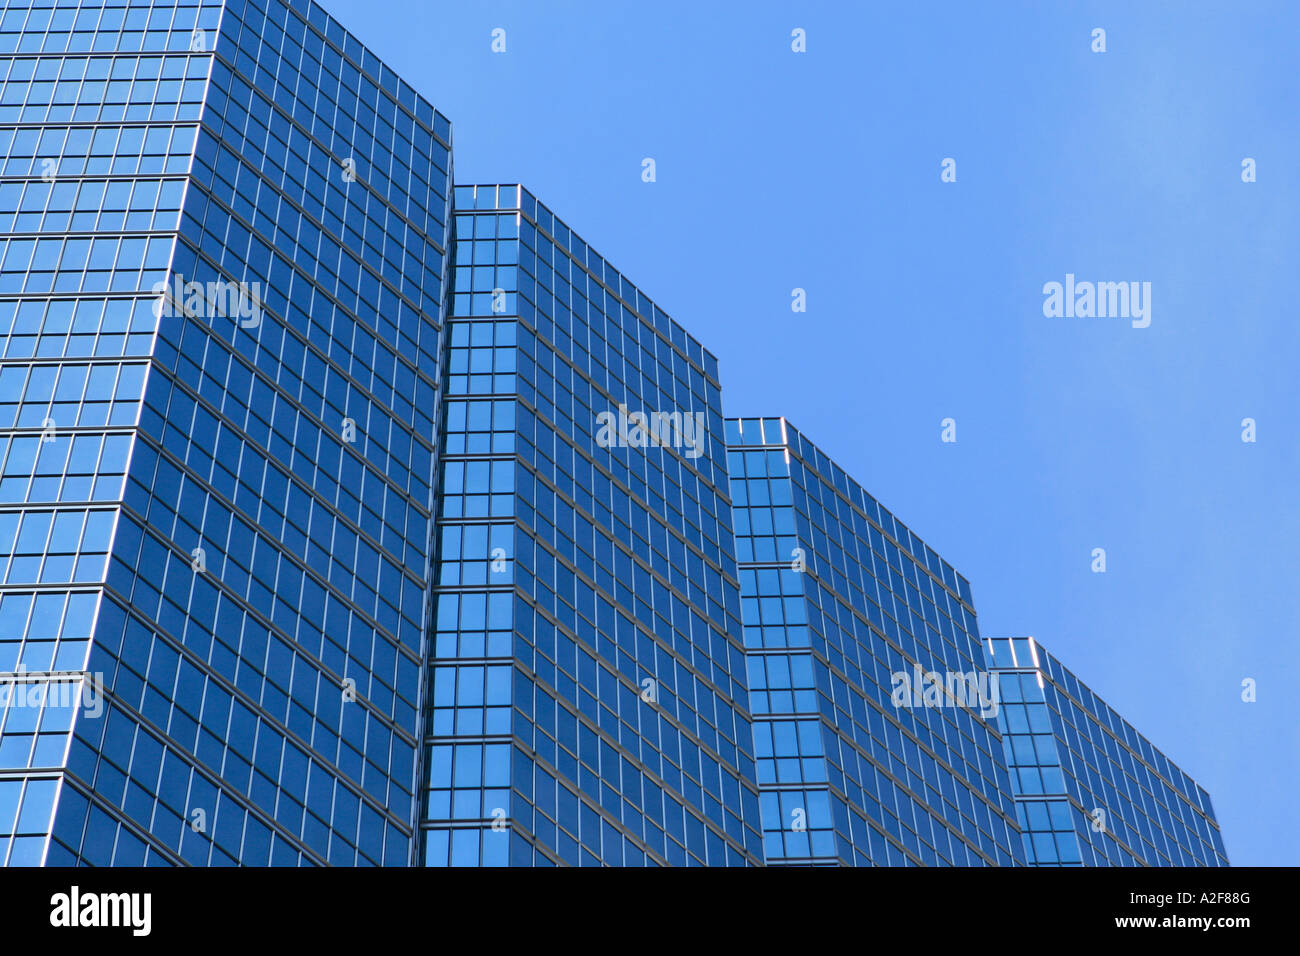 These windows on a blue sky are downtown toronto Canada Stock Photo